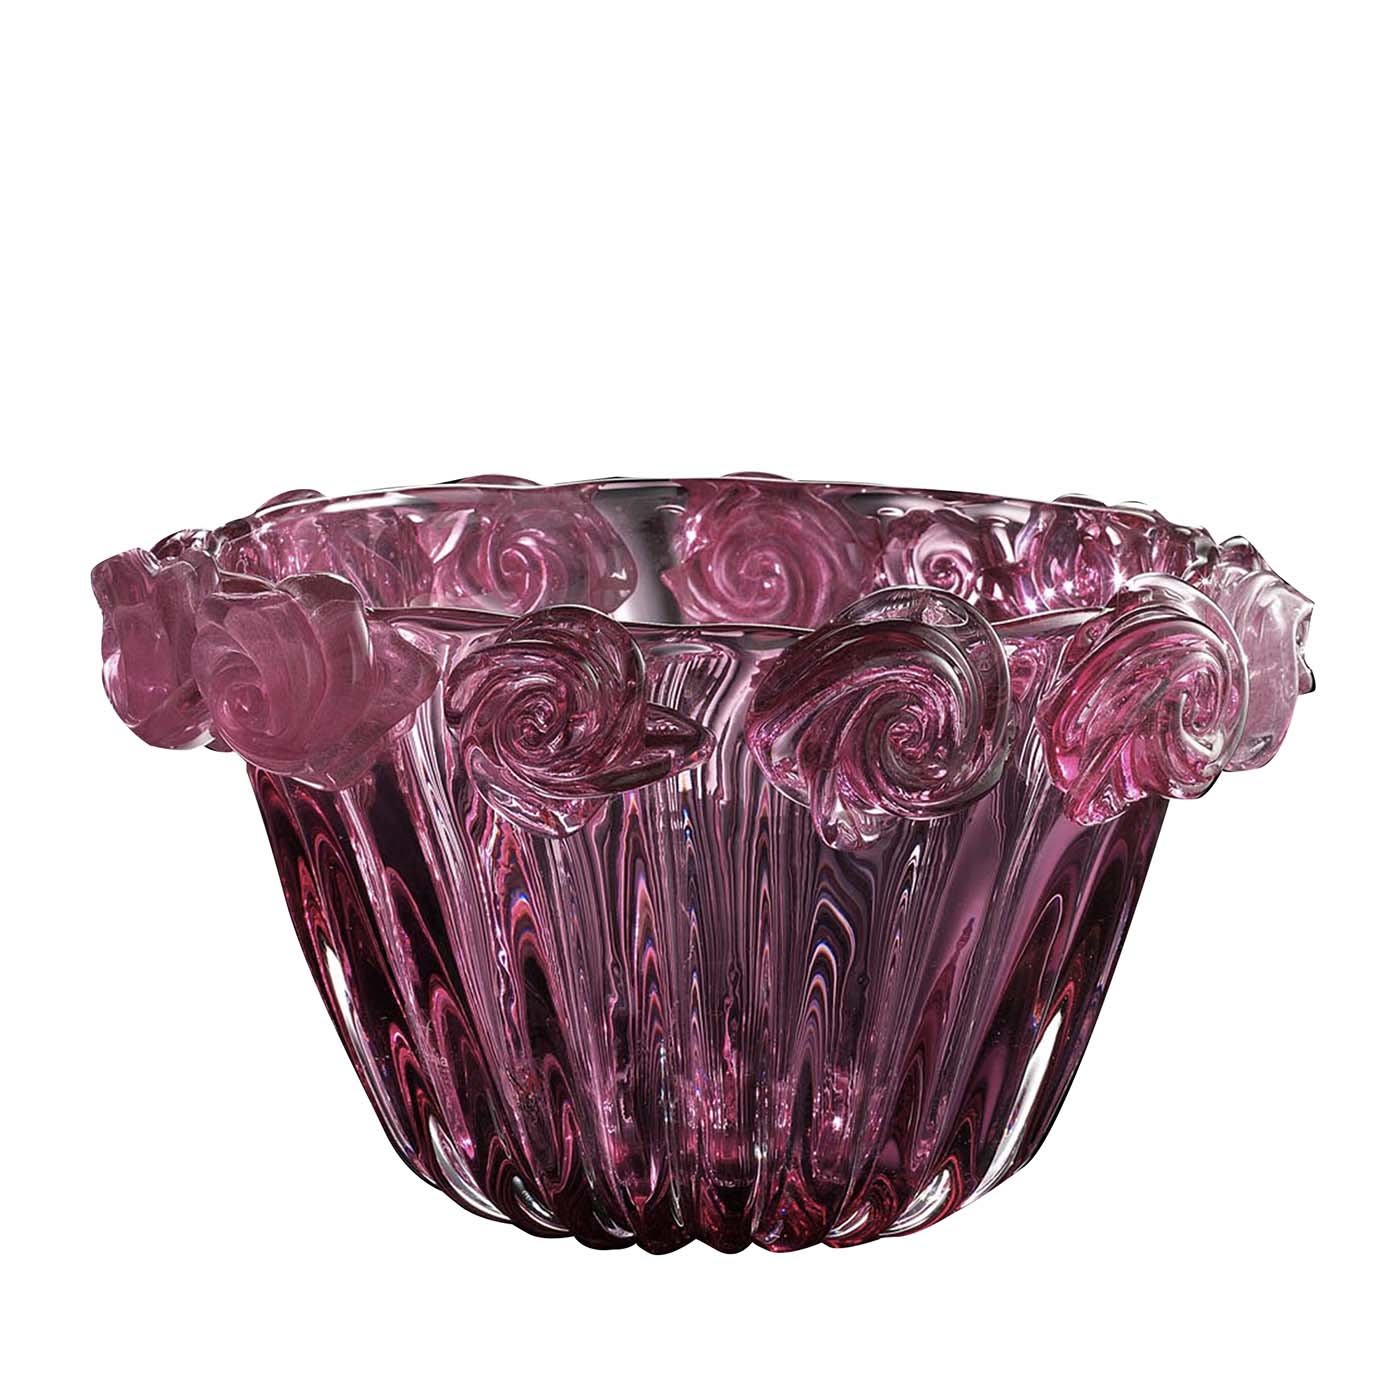 Rose Ruby Bowl - Fornace Mian